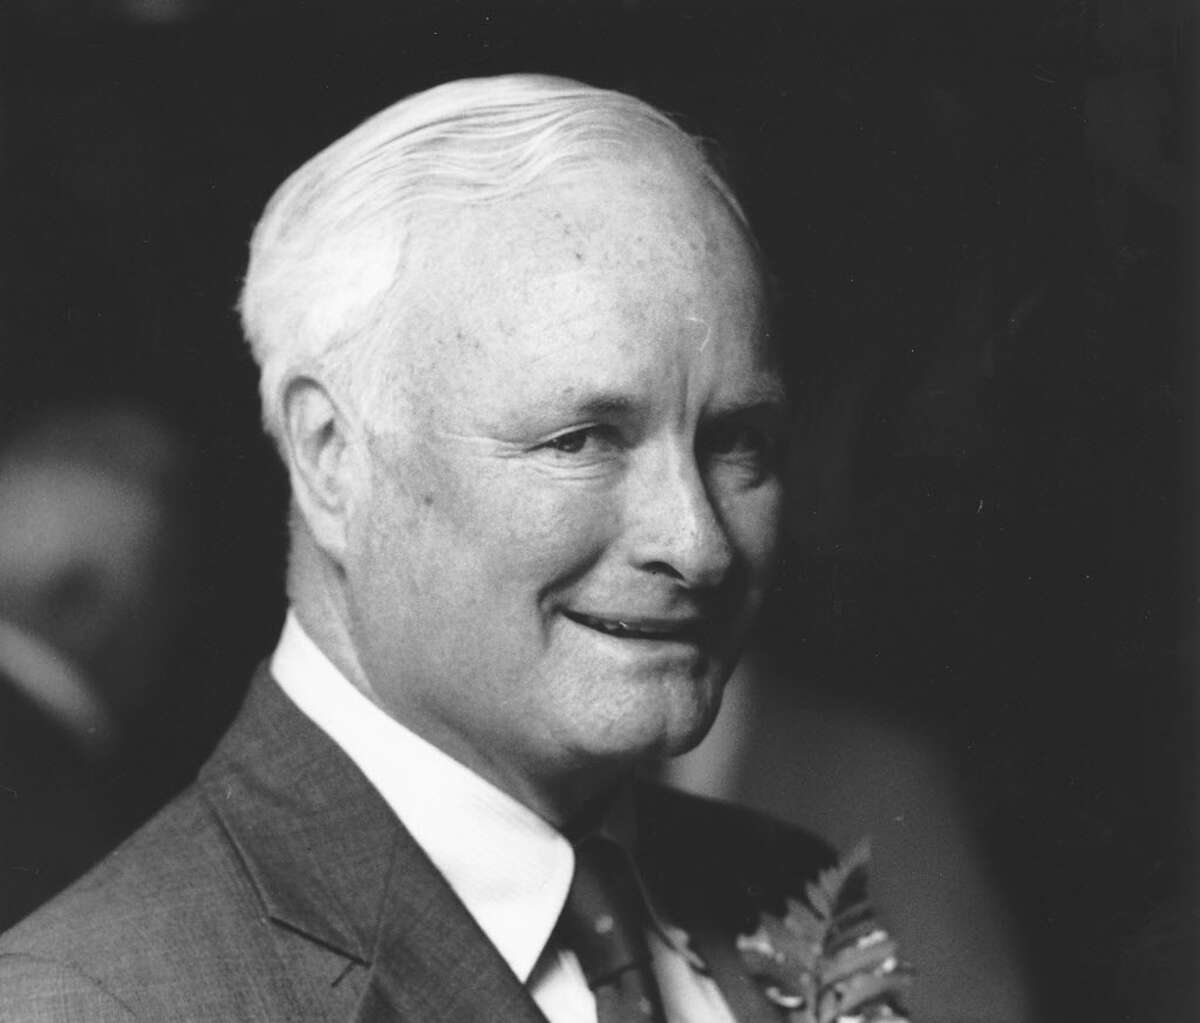 May 21, 1988 - Former Stamford Mayor William F. Hickey. He was honored by the State Street Debating Societey.